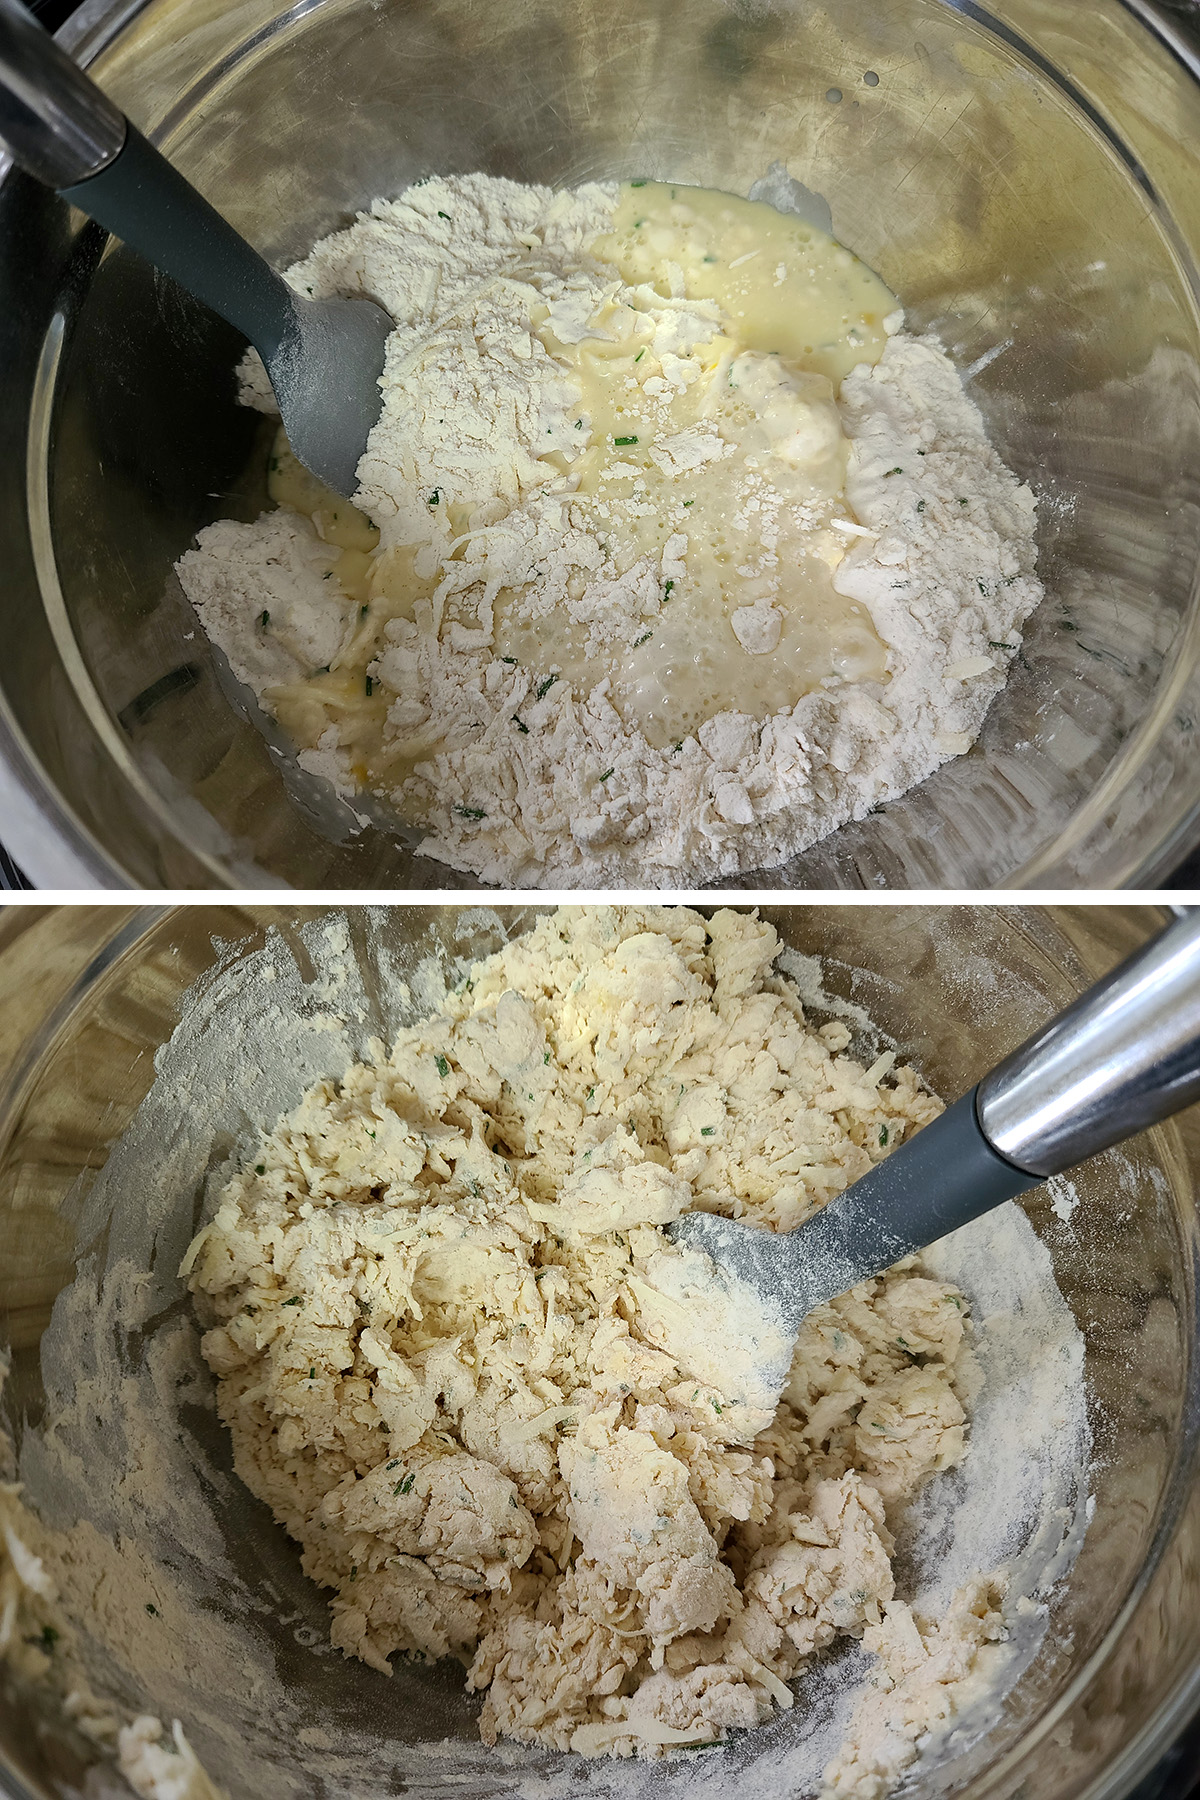 A two part compilation image showing the wet ingredients added to the bowl, and the loose dough after being mixed together.